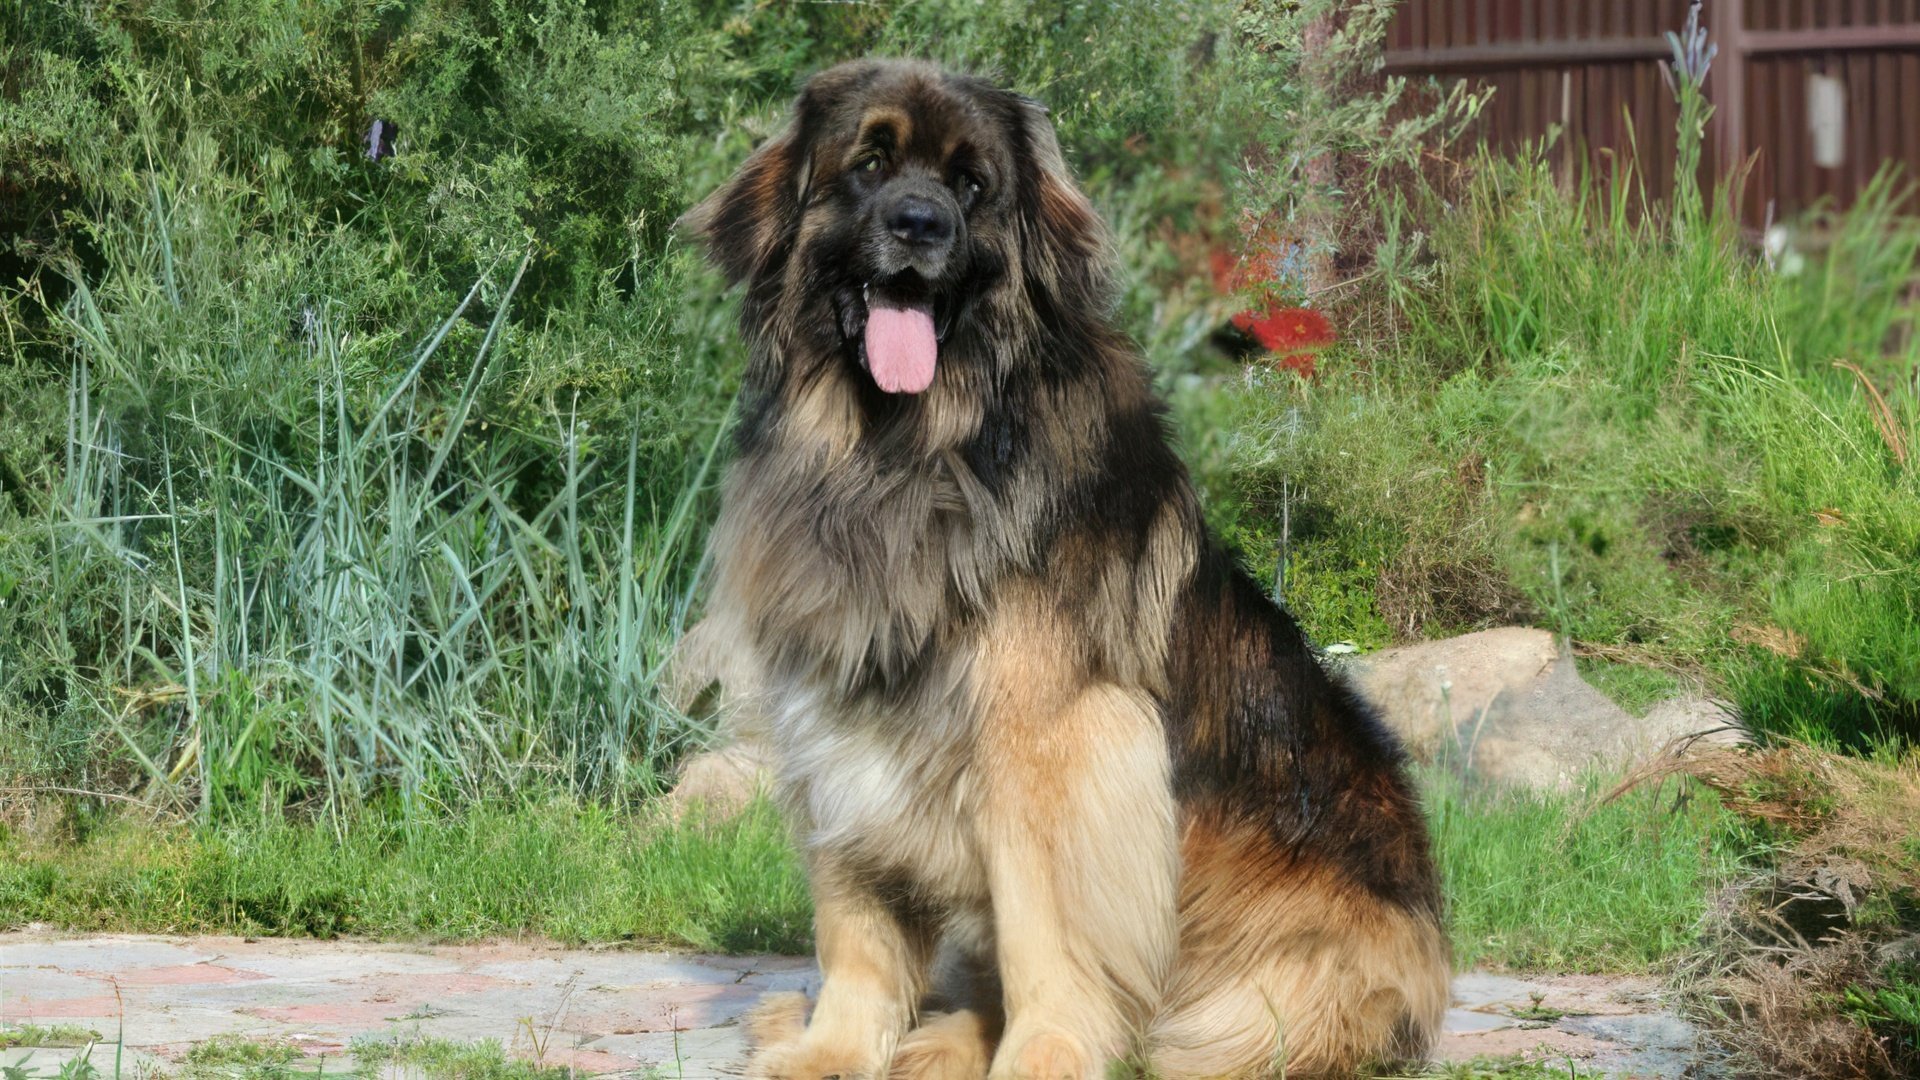 The Leonberger has lived with the actor for a long time